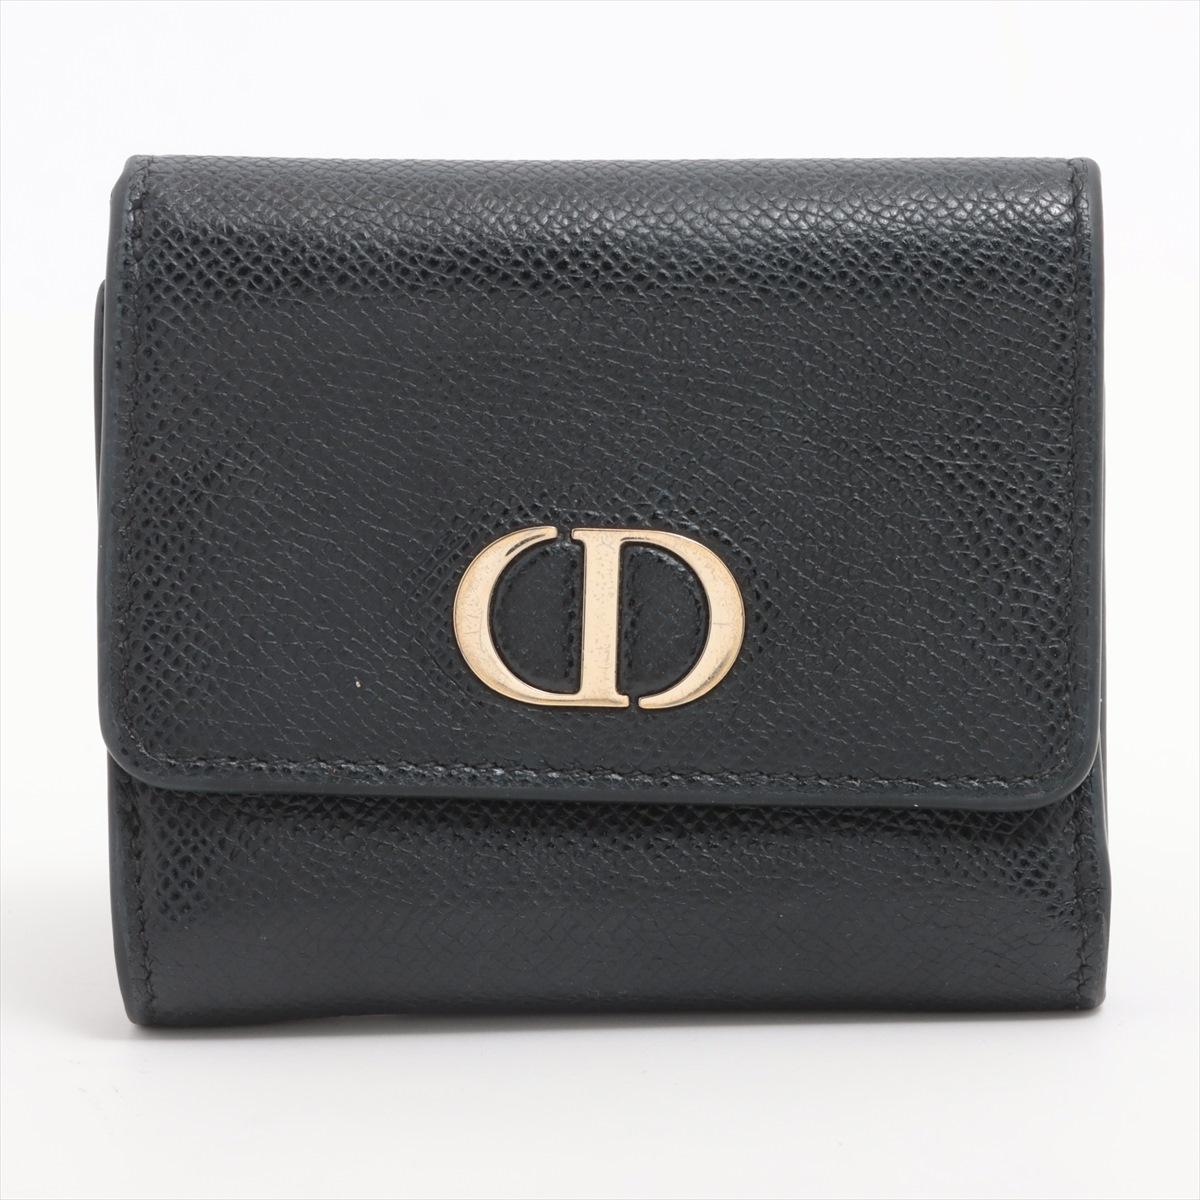 Dior Montaigne Leather Trifold Wallet Black In Good Condition For Sale In Indianapolis, IN